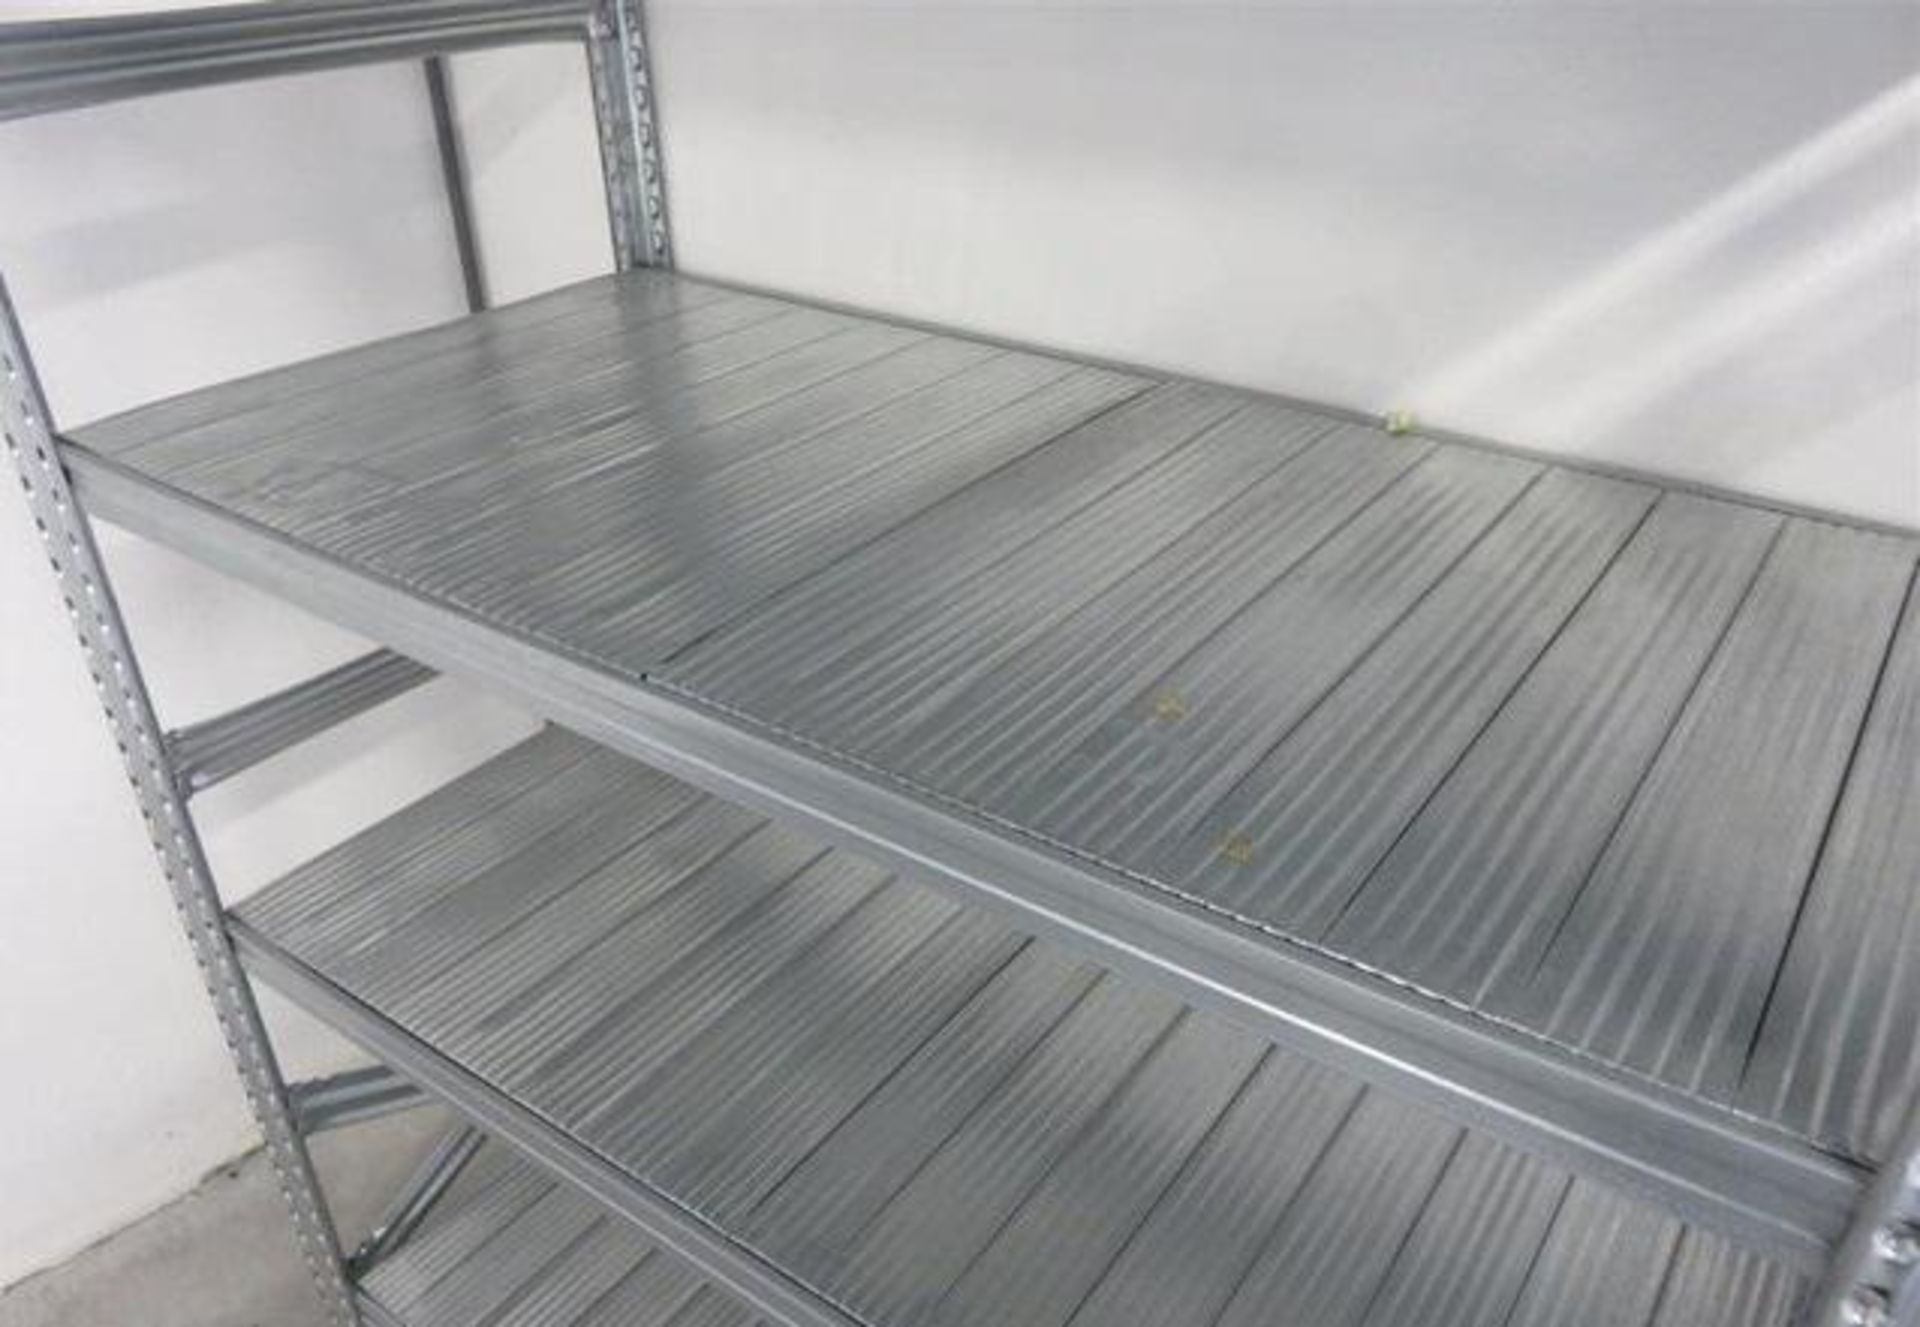 4 x Bays of Metalsistem Steel Modular Storage Shelving - Includes 29 Pieces - Recently Removed - Image 10 of 17